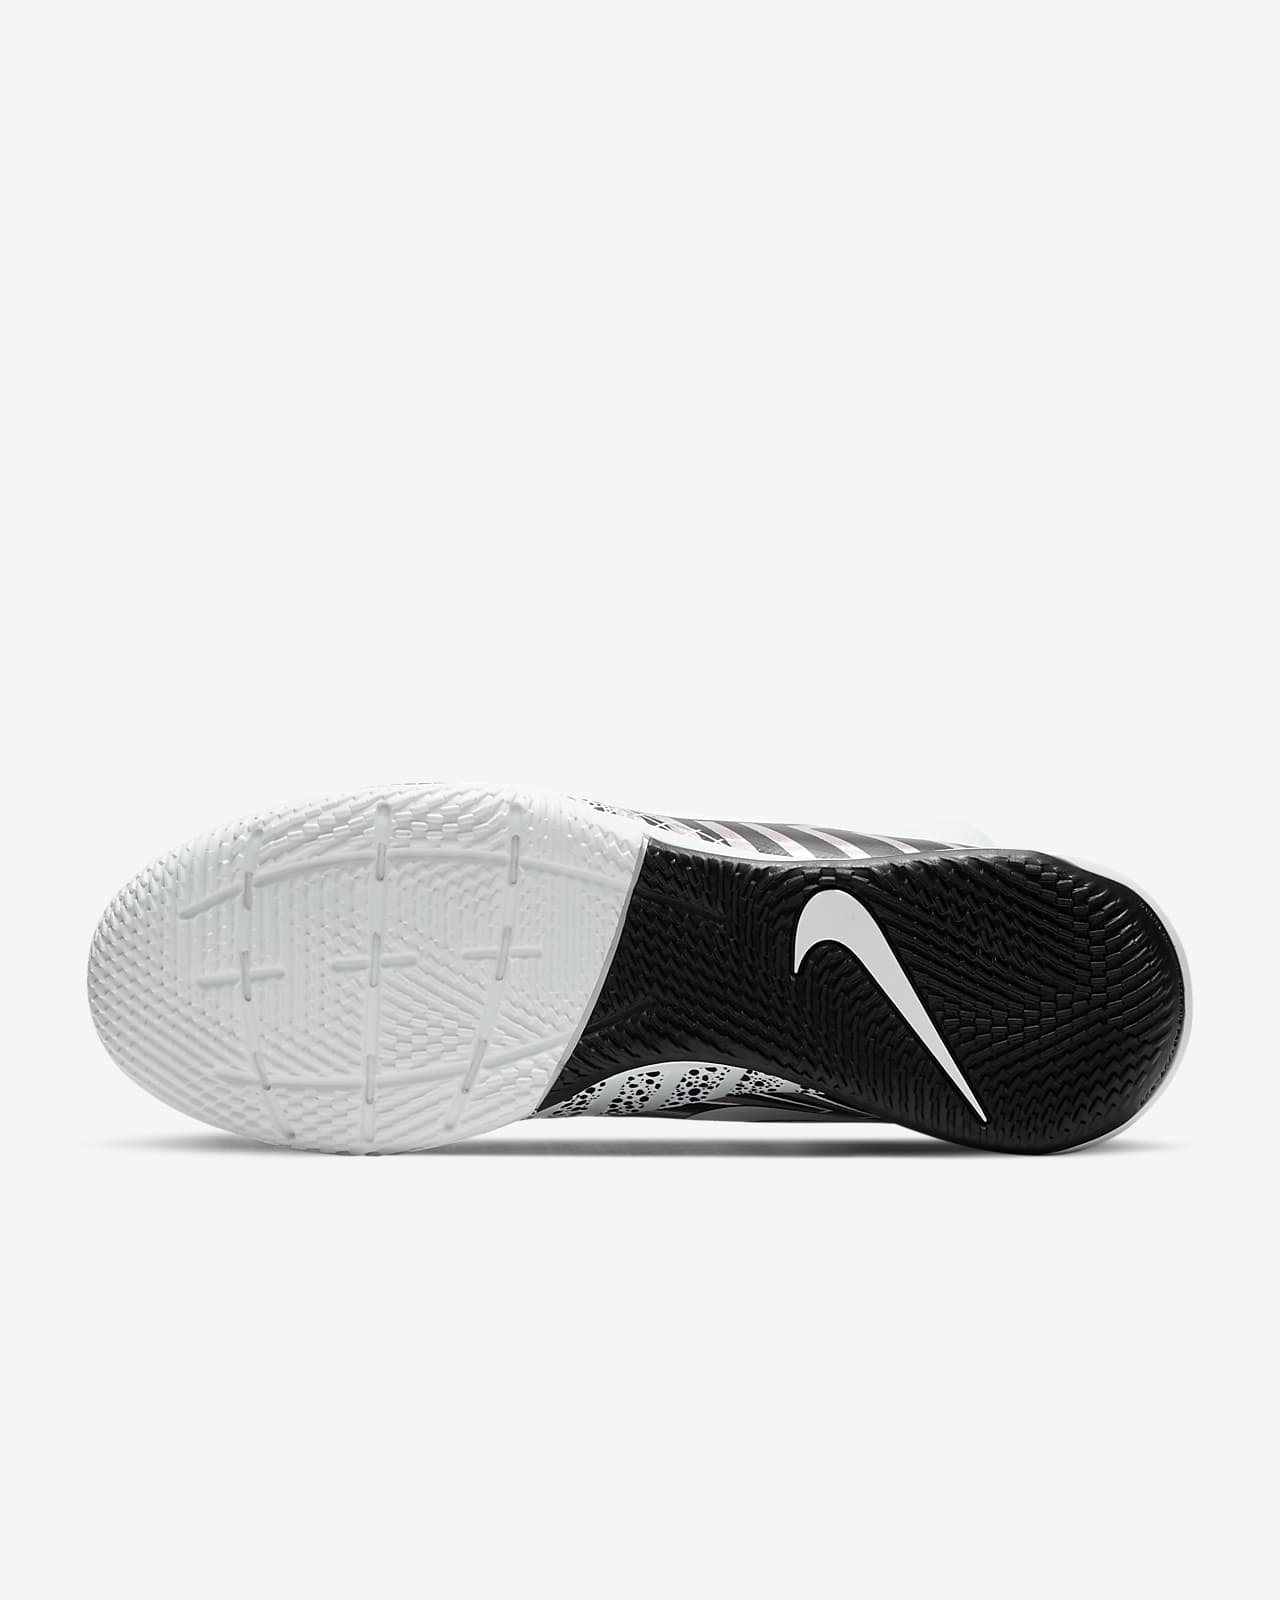 nike indoor soccer shoes white